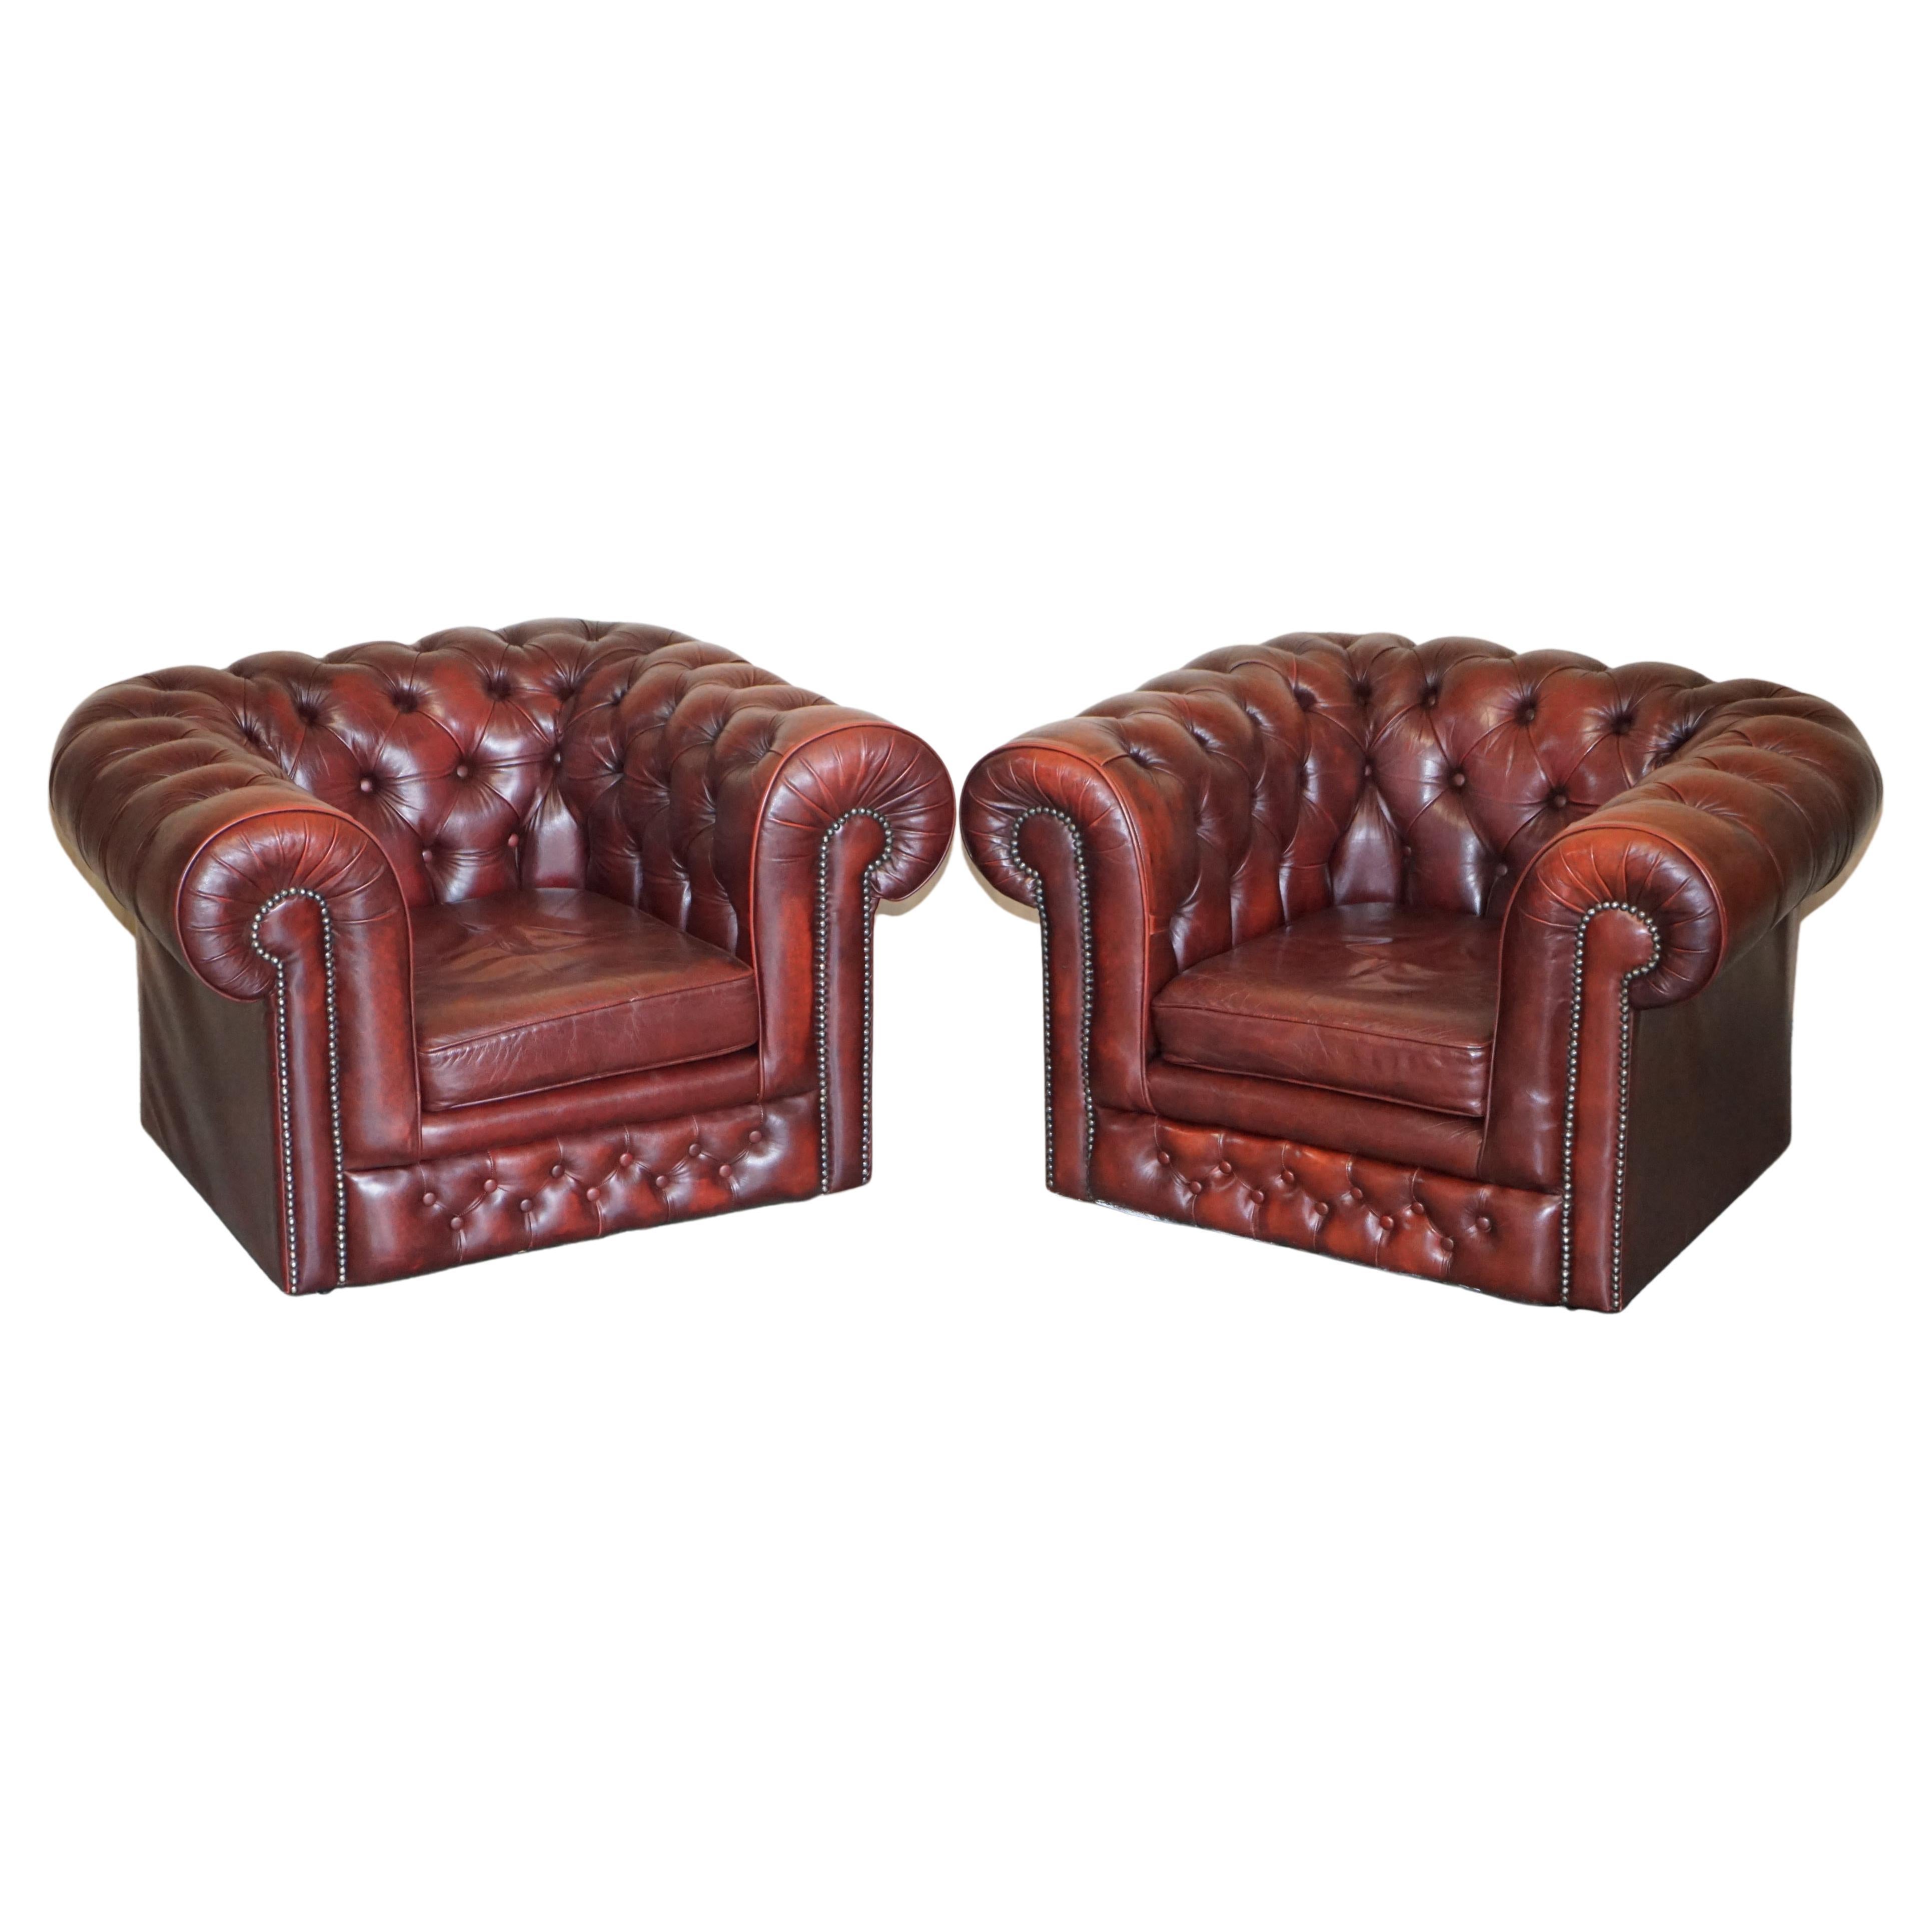 Pair of Lovely Vintage Oxblood Leather Chesterfield Gentleman's Club Armchairs For Sale